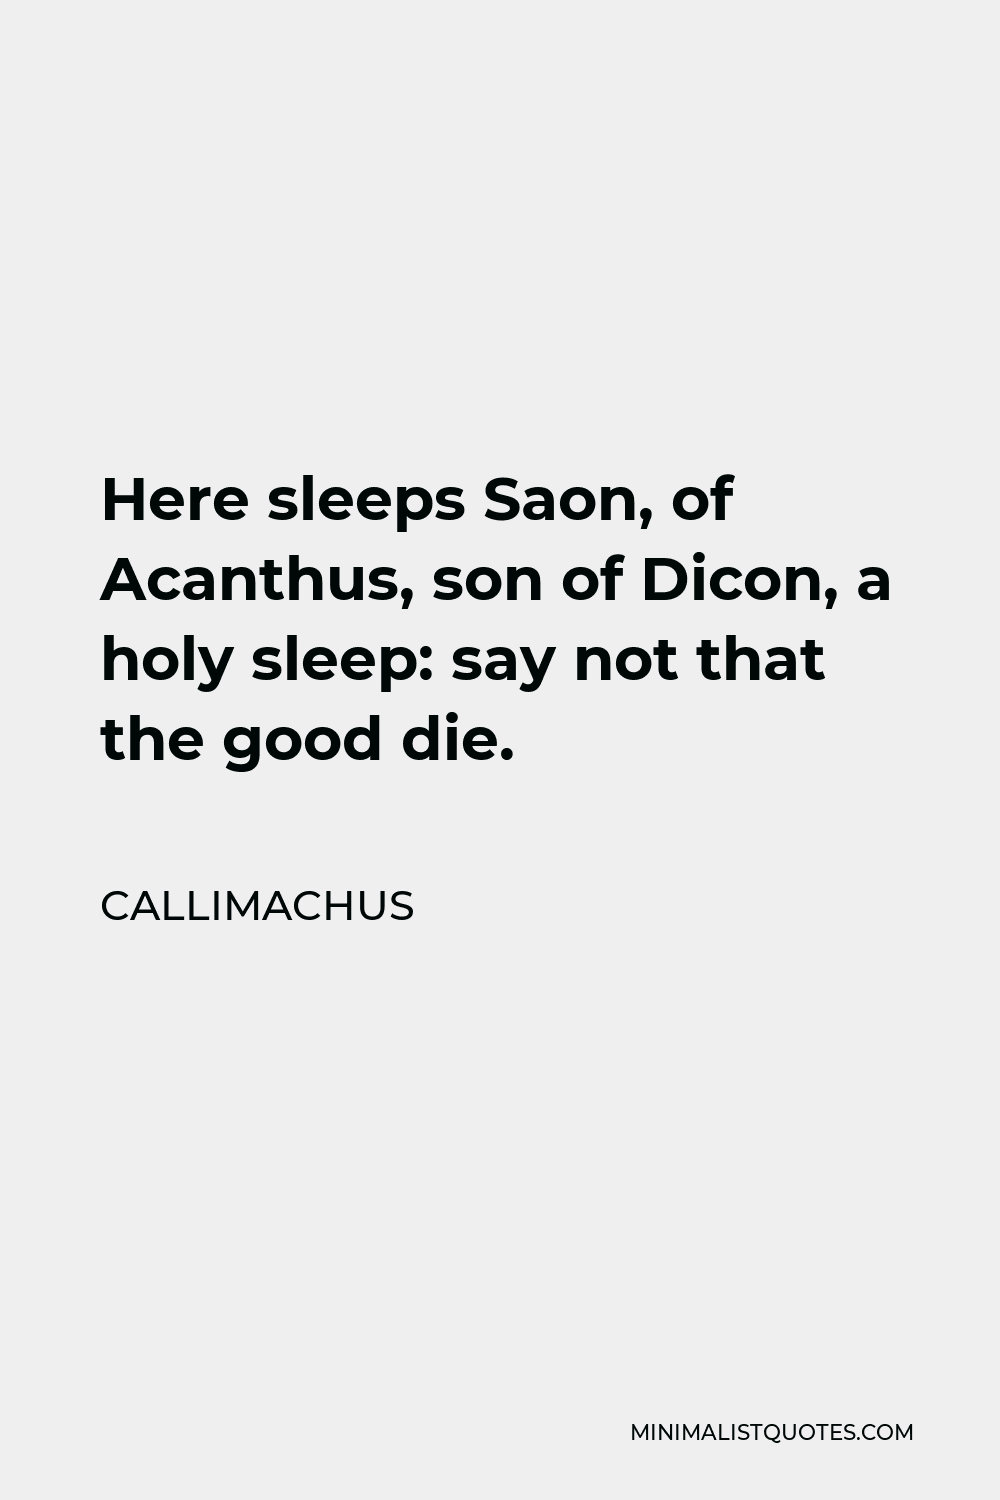 Callimachus Quote - Here sleeps Saon, of Acanthus, son of Dicon, a holy sleep: say not that the good die.